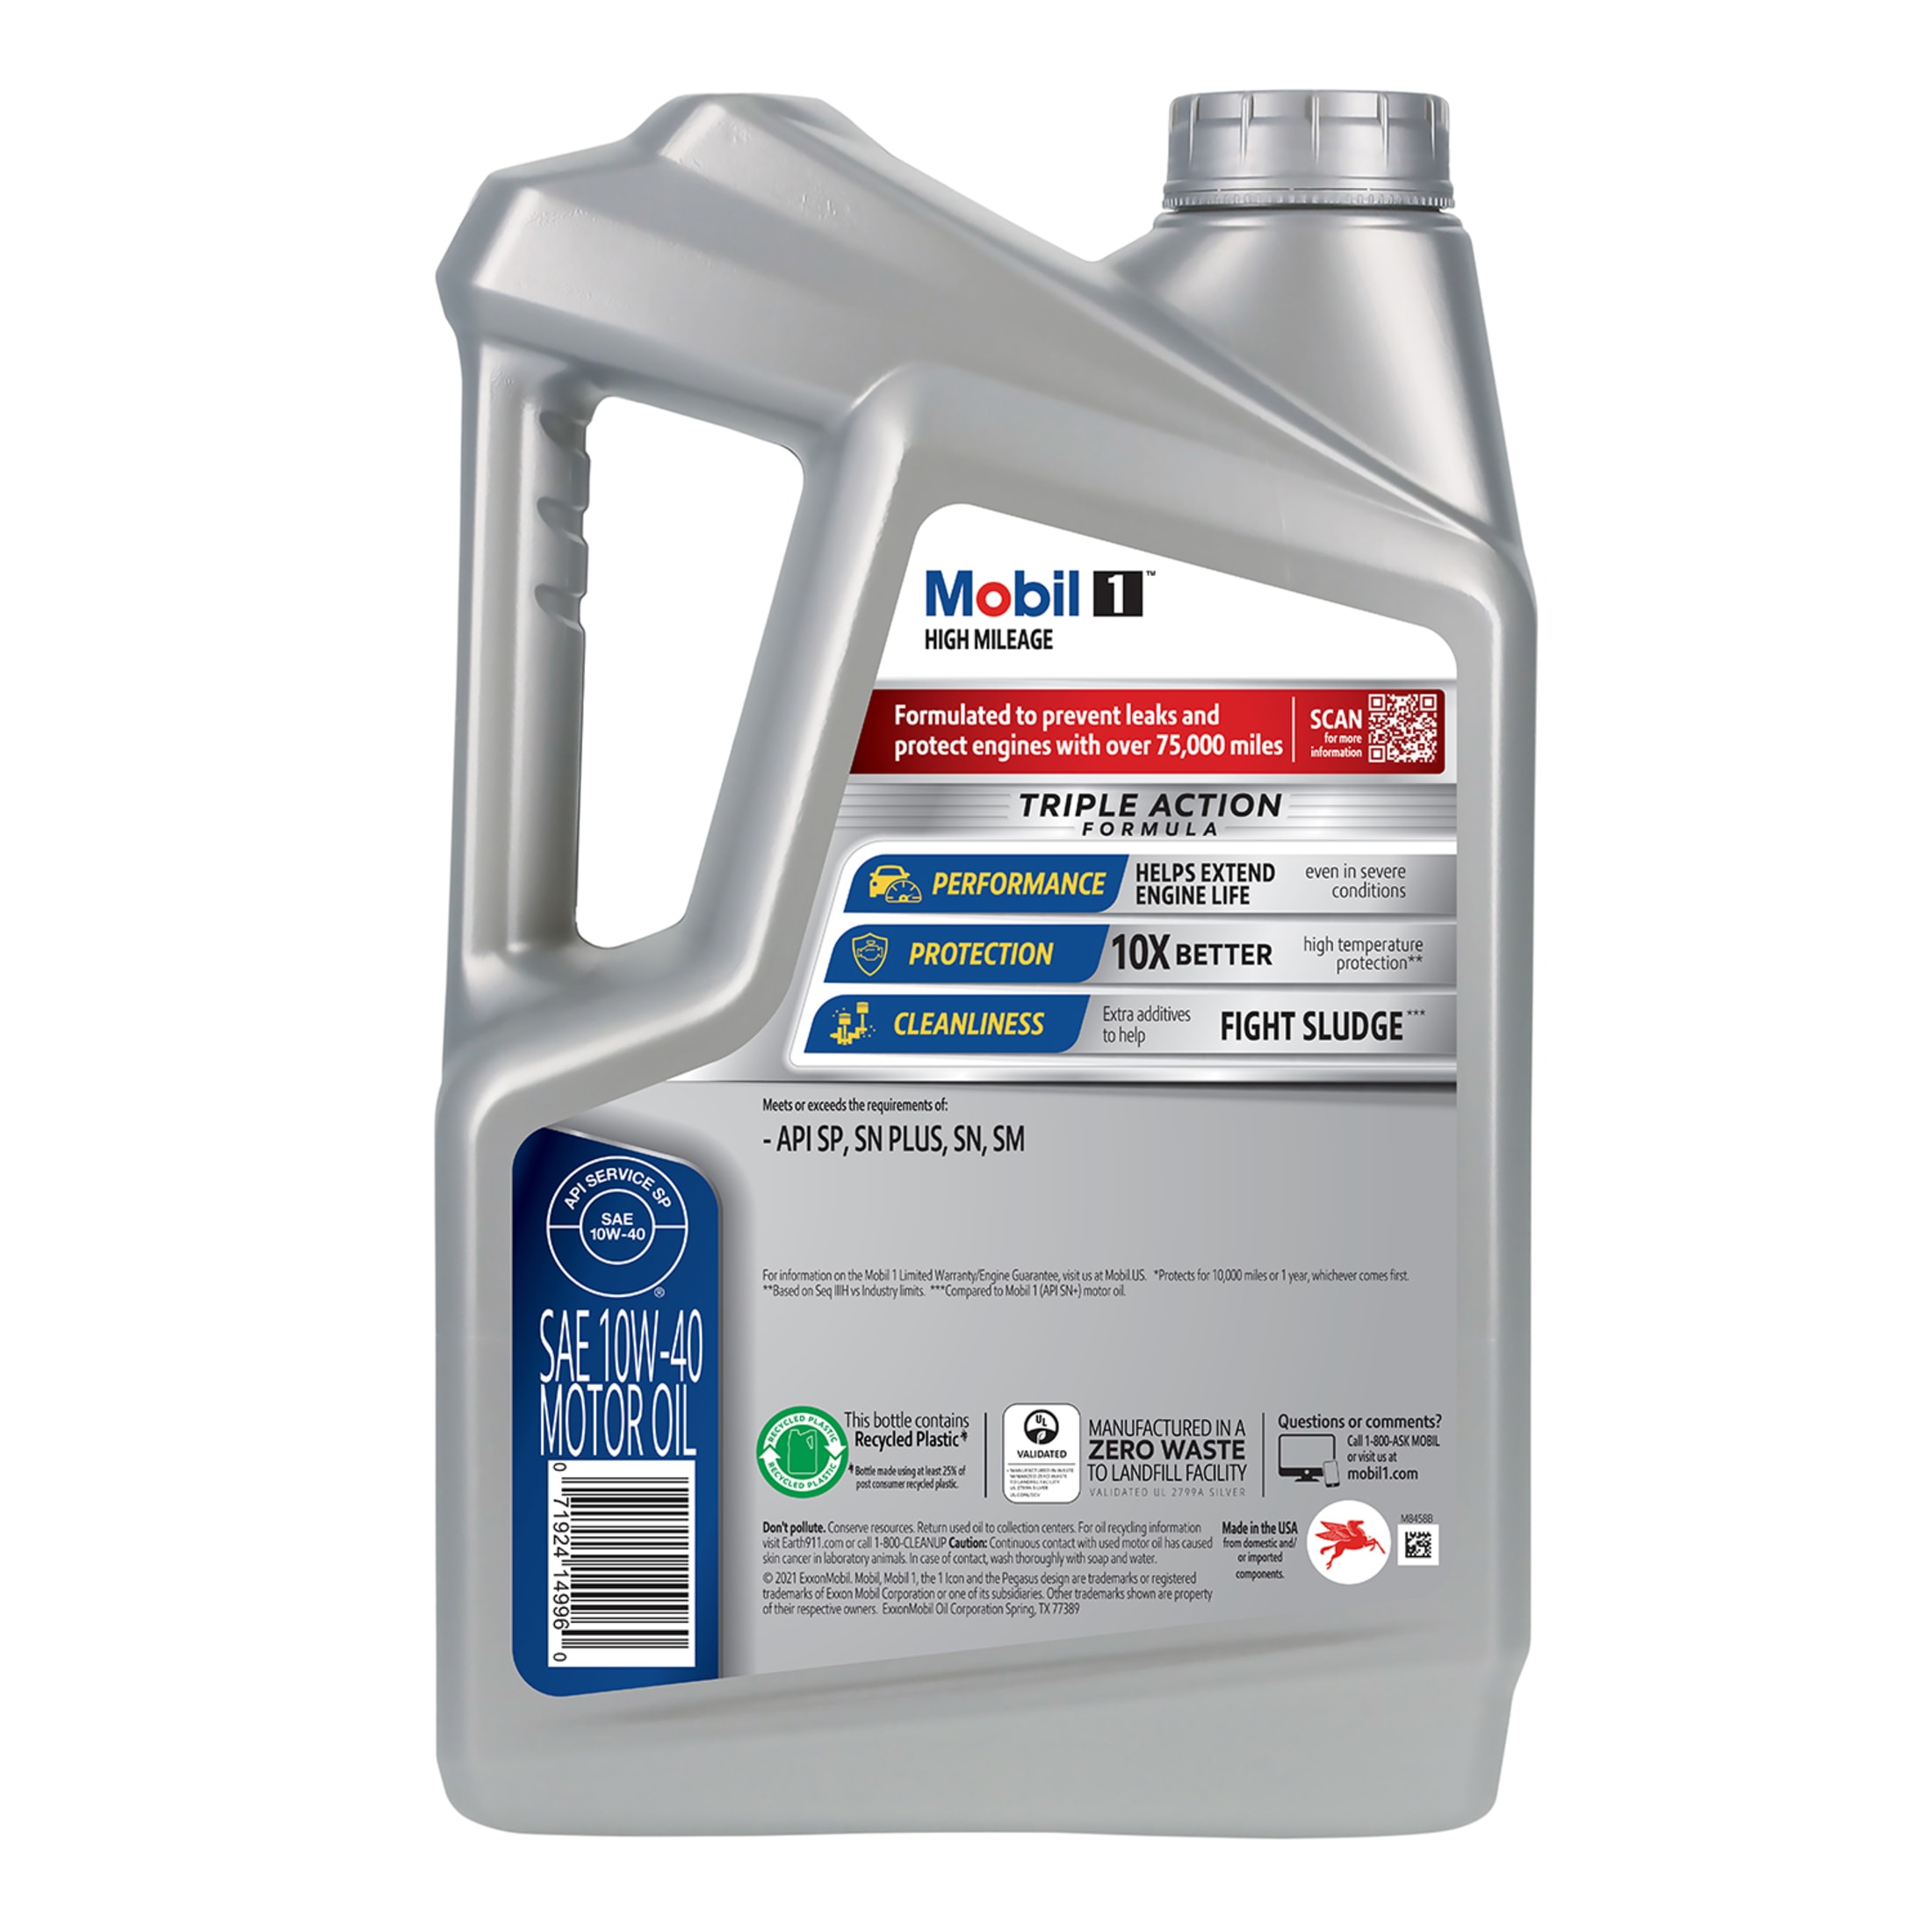 Mobil 1 High Mileage Full Synthetic Motor Oil 10W-40, 5 Quart - image 4 of 9